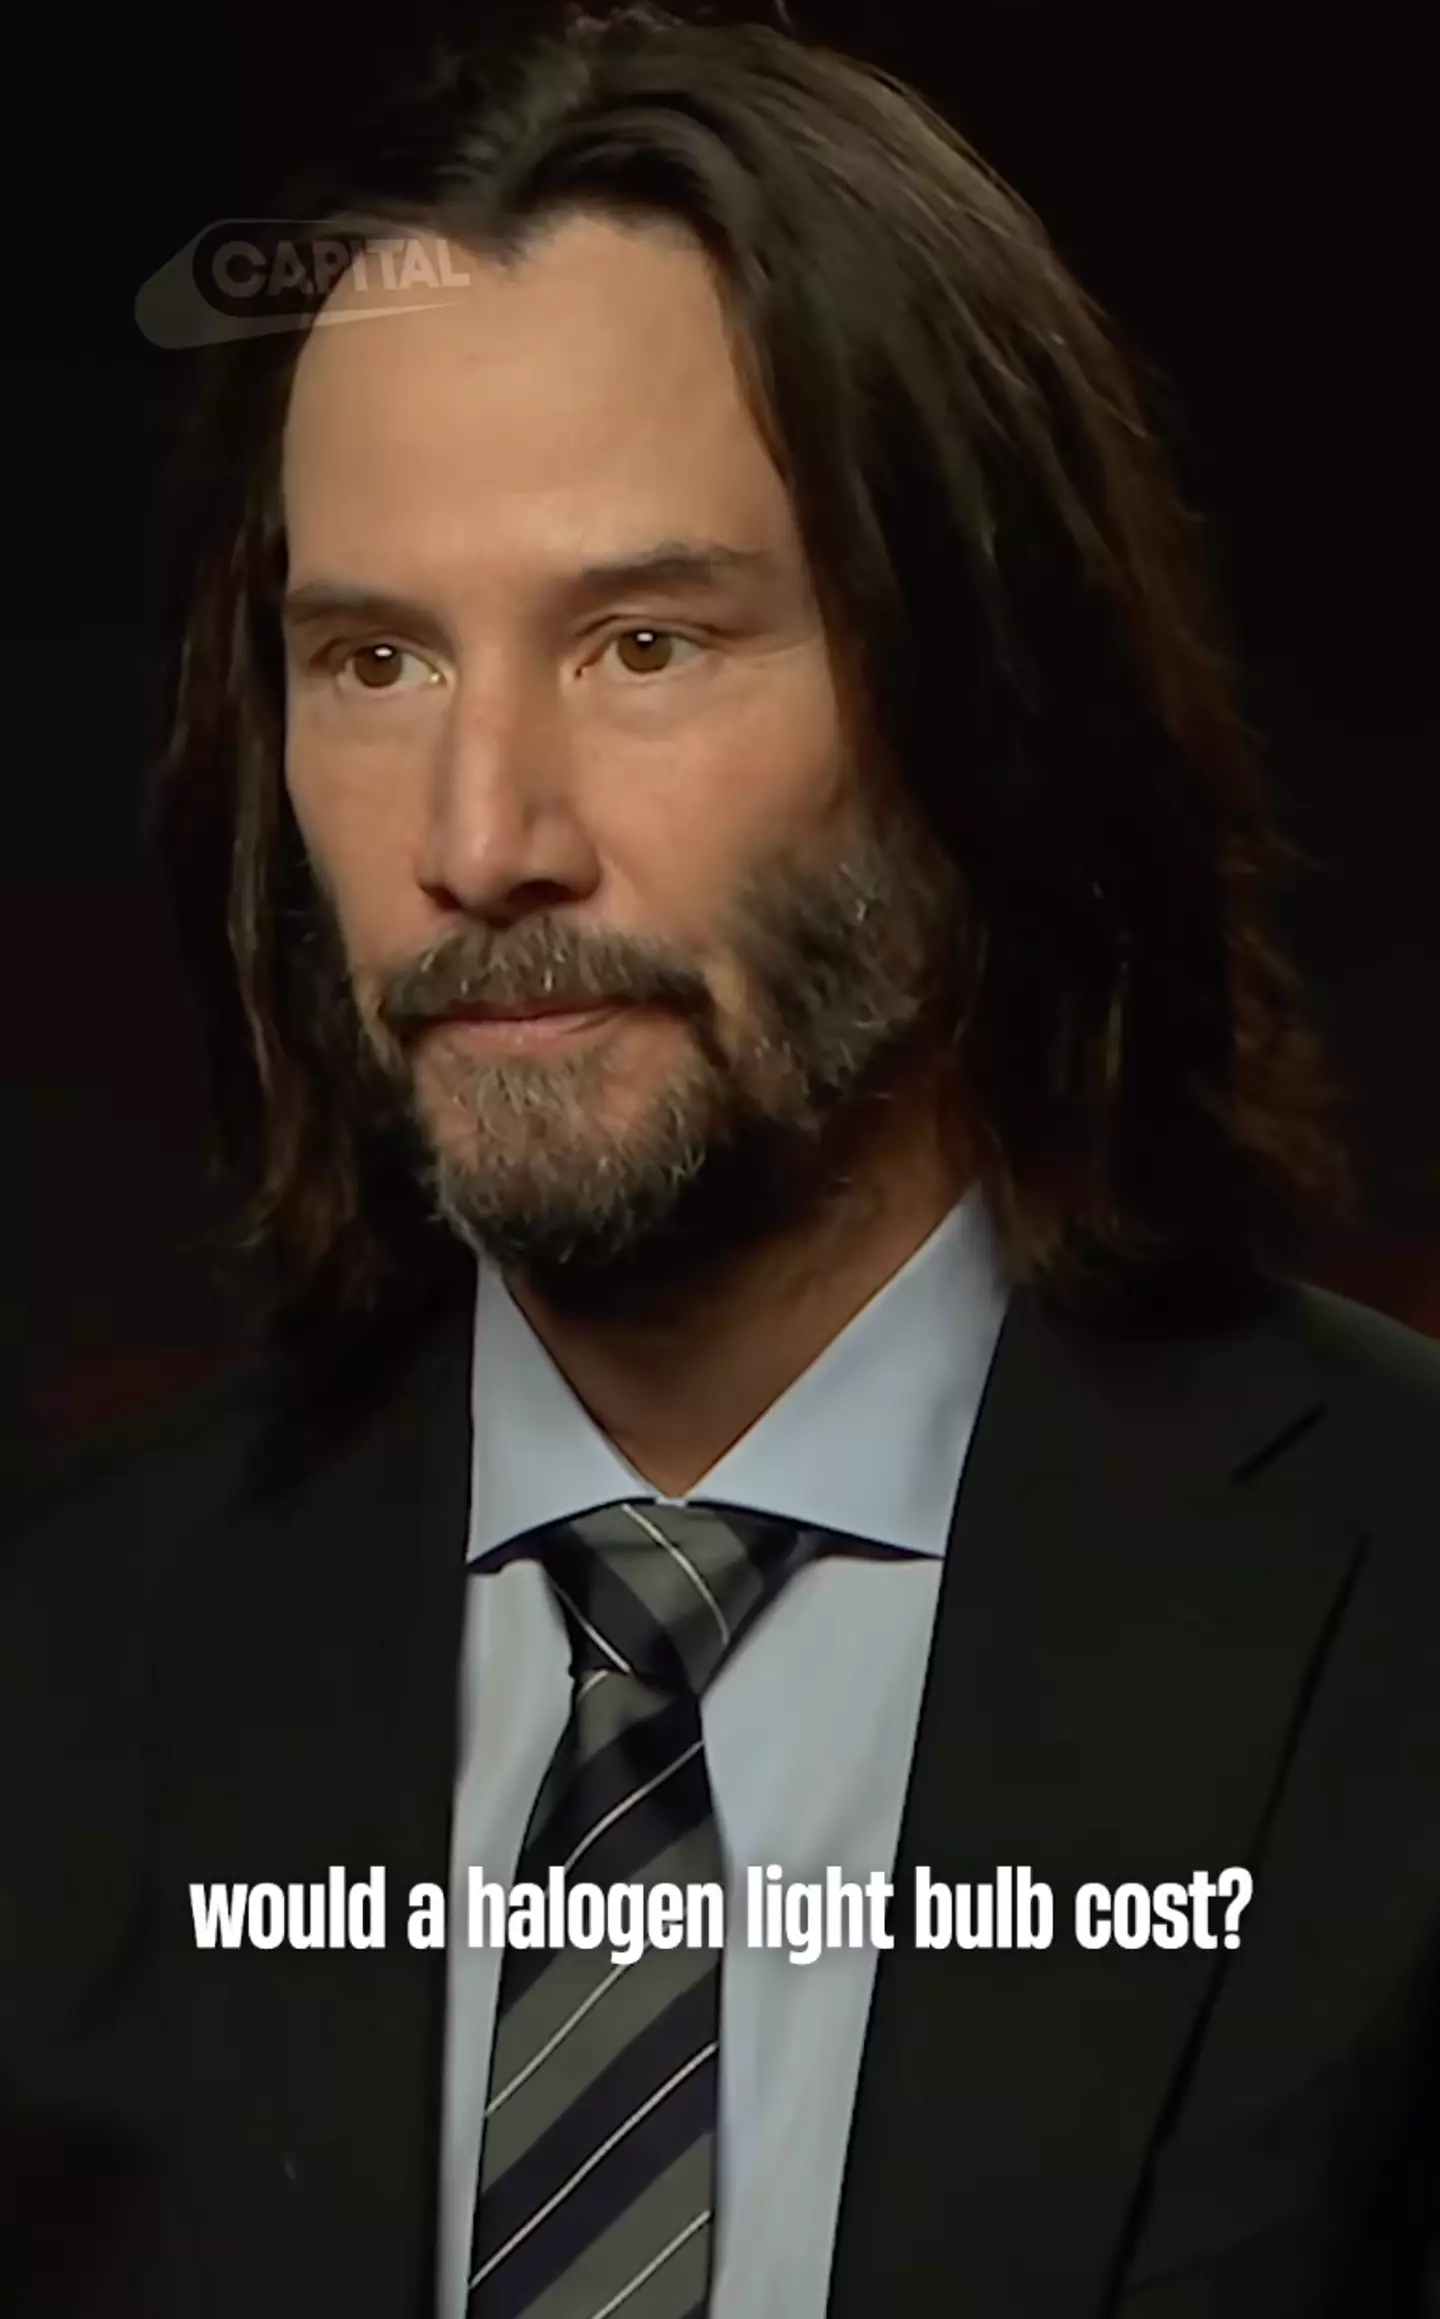 Keanu Reeves looked baffled, but it could of course just be down to cheeky editing.